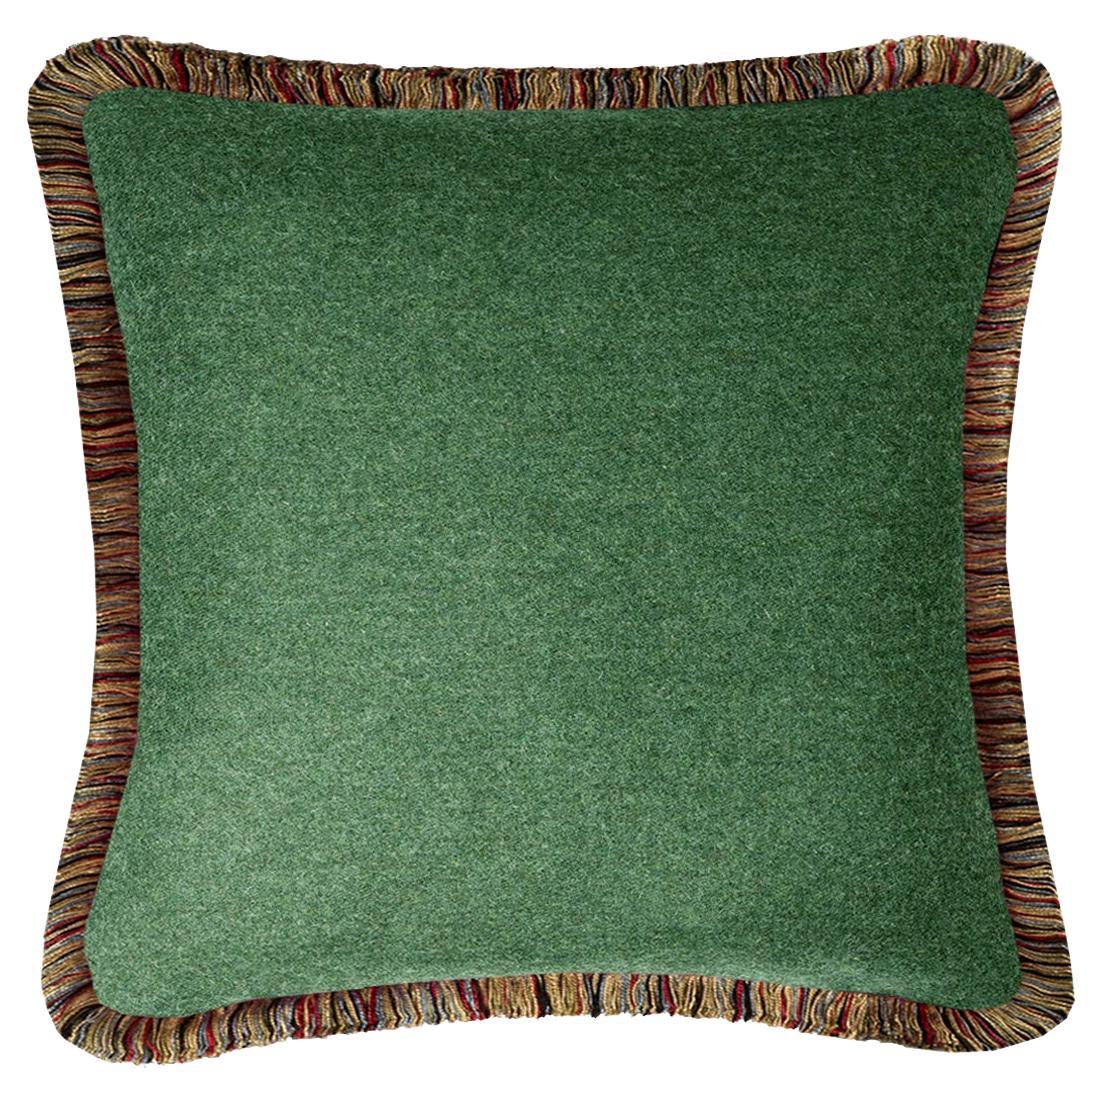 Happy Pillow MONGOLIA Wool Cushion Green With Multicolor Fringes